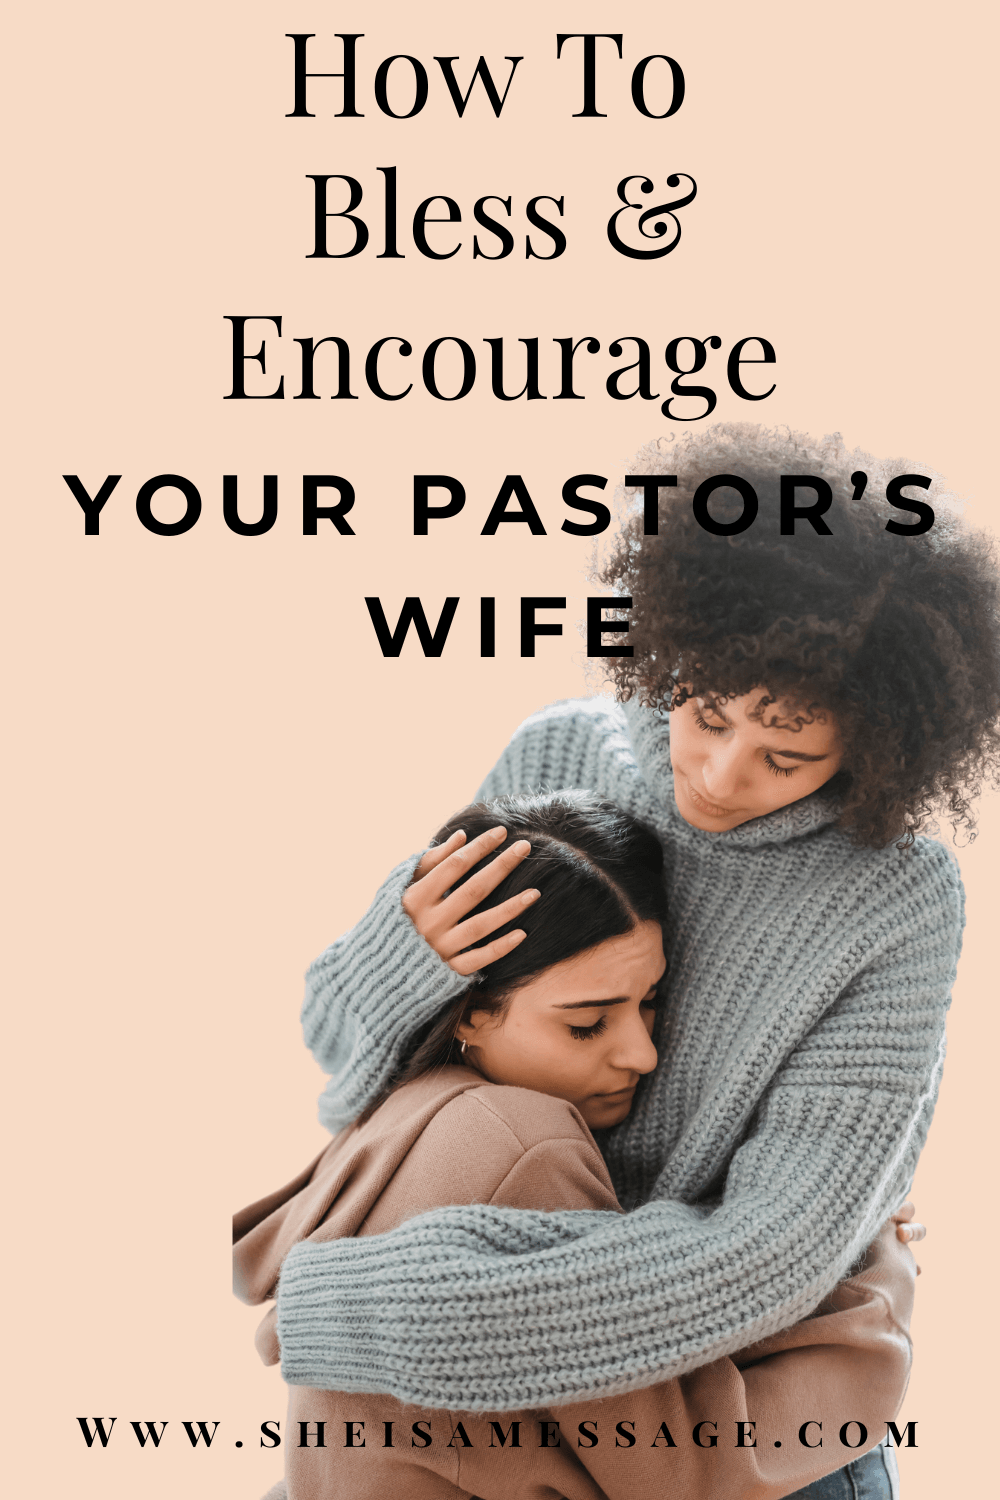 20 Simple Ways To Encourage Your Pastor's Wife Today 1